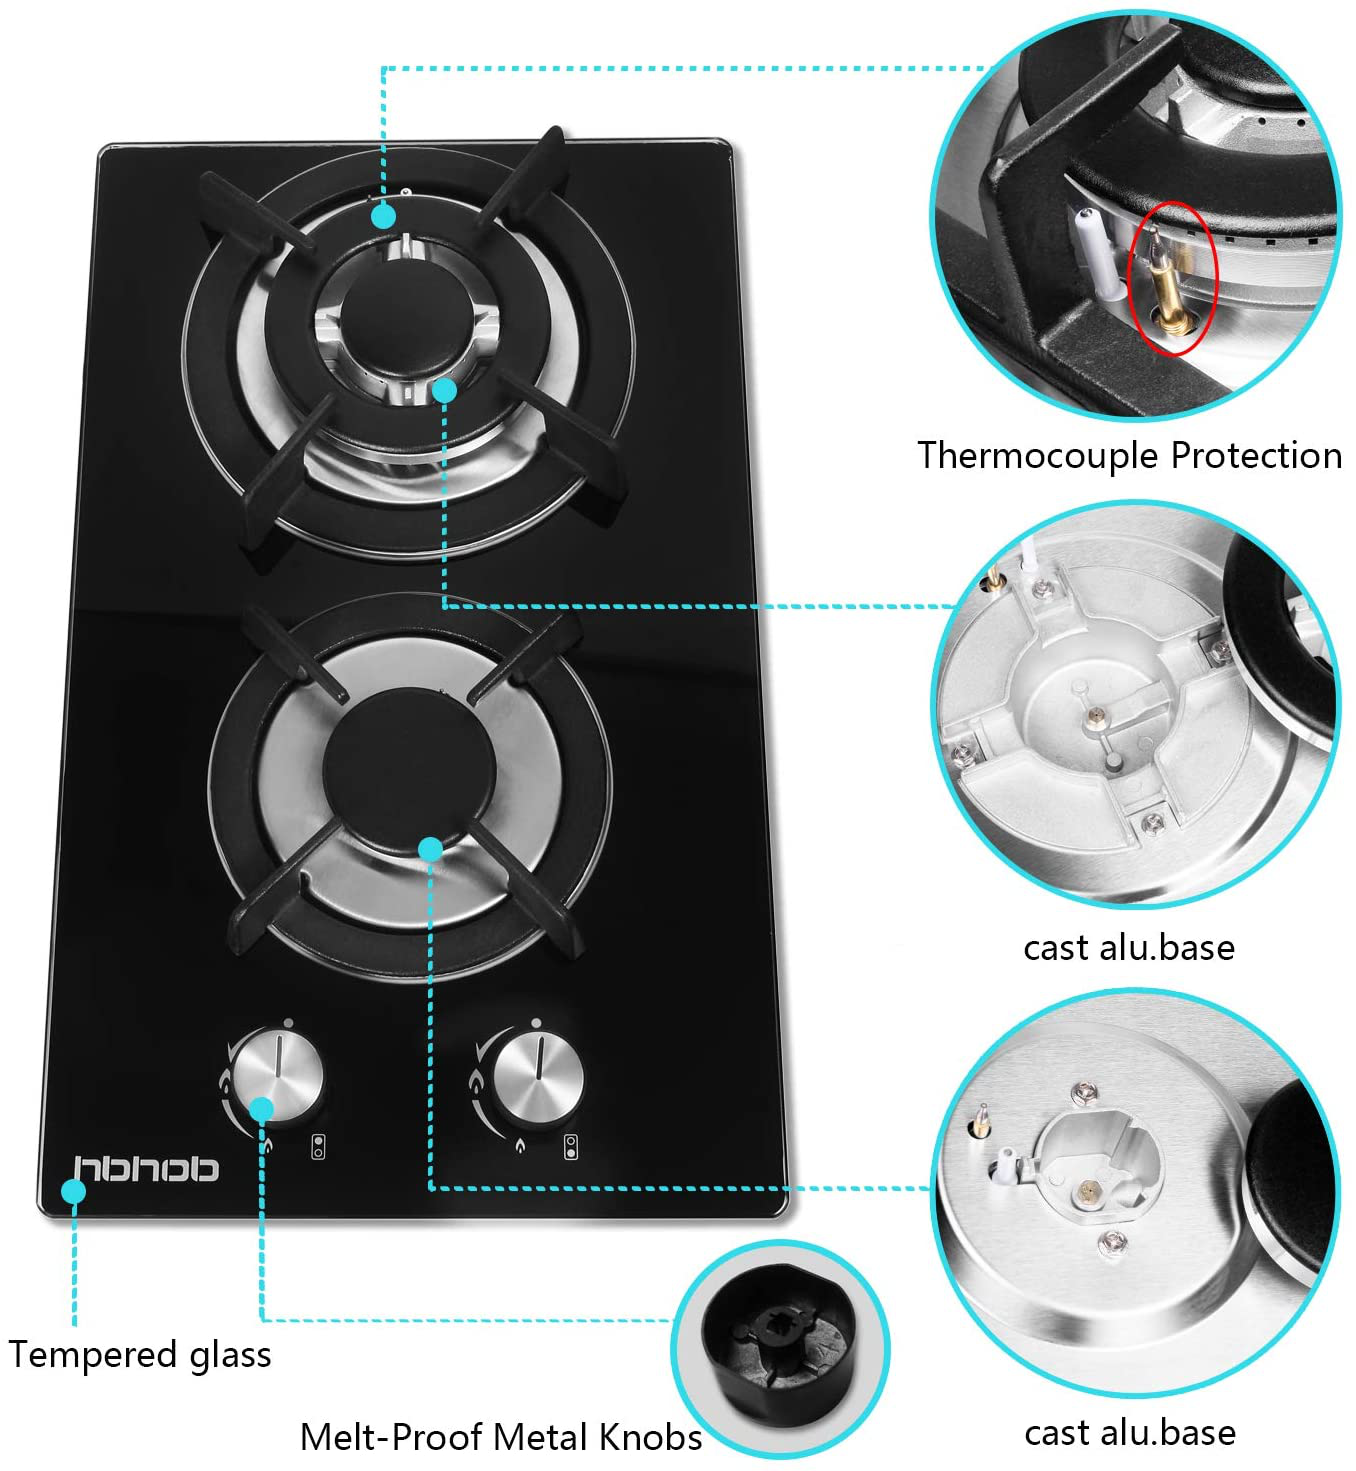 12 In Gas Stove High Gas Cooktop Gas Hob Stove Top 2 Burners Gas Range Double Burner Gas Stoves Kitchen Slope Edge Tempered Glass